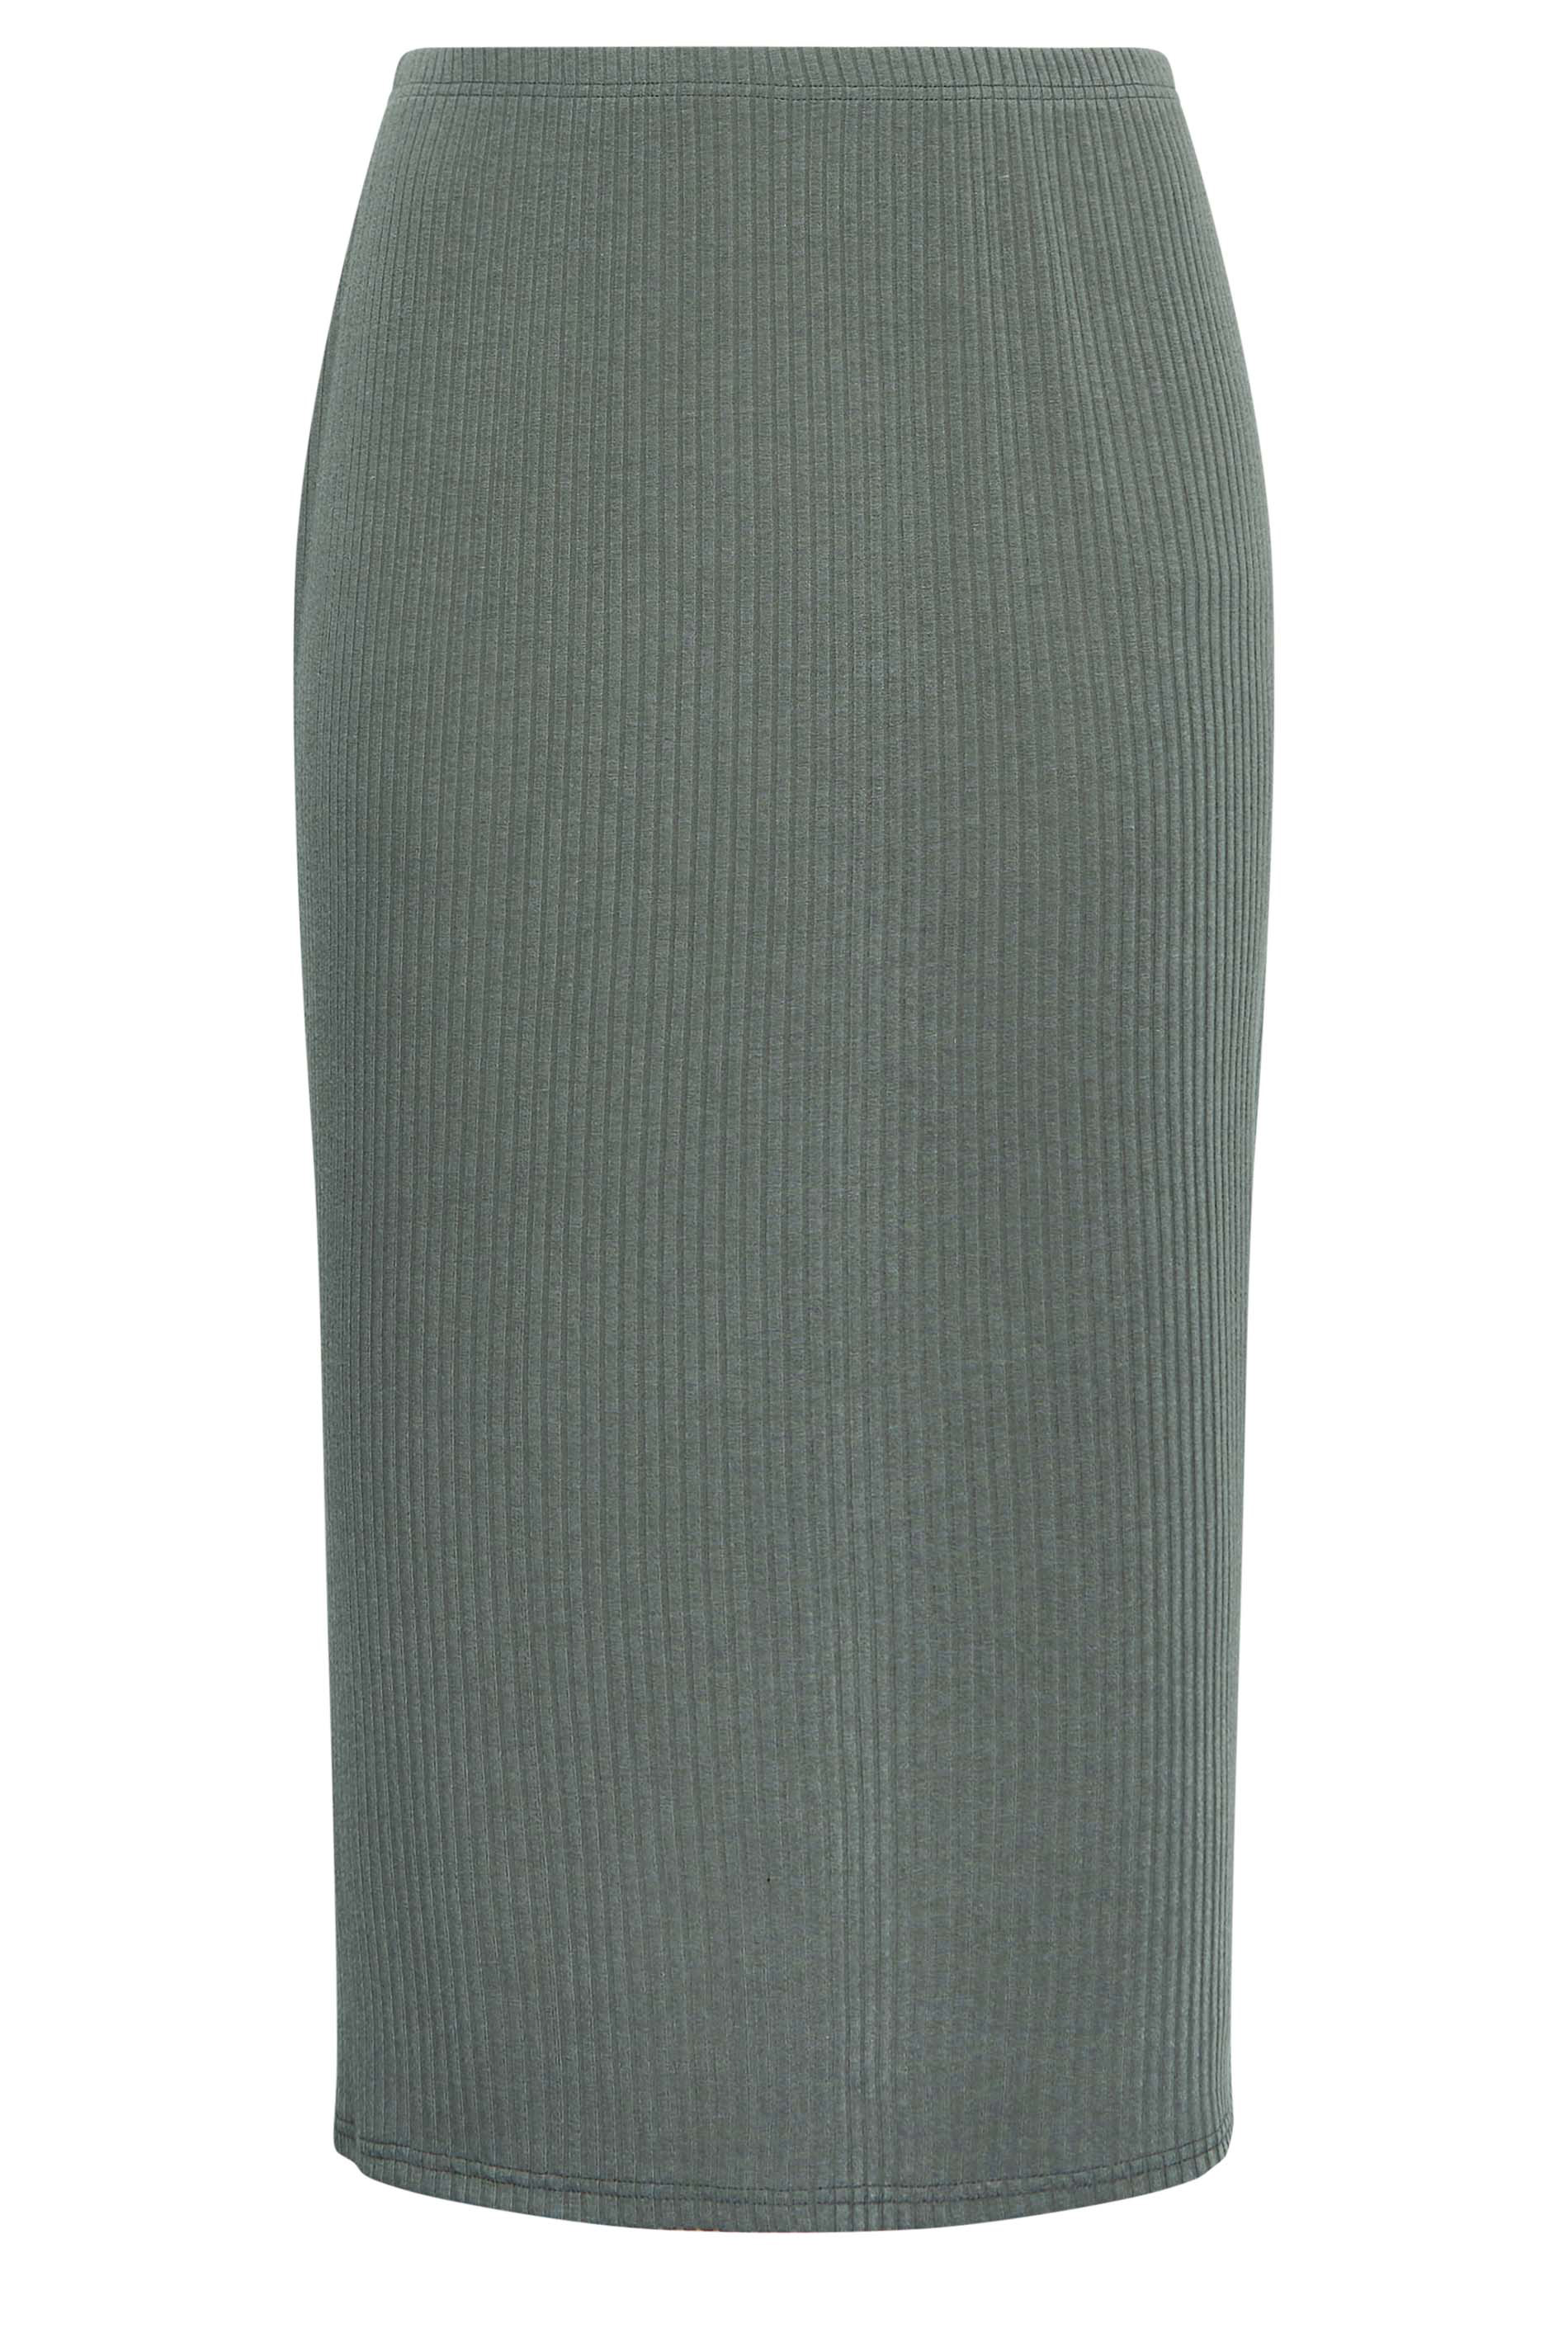 YOURS Plus Size Sage Green Ribbed Midi Skirt | Yours Clothing